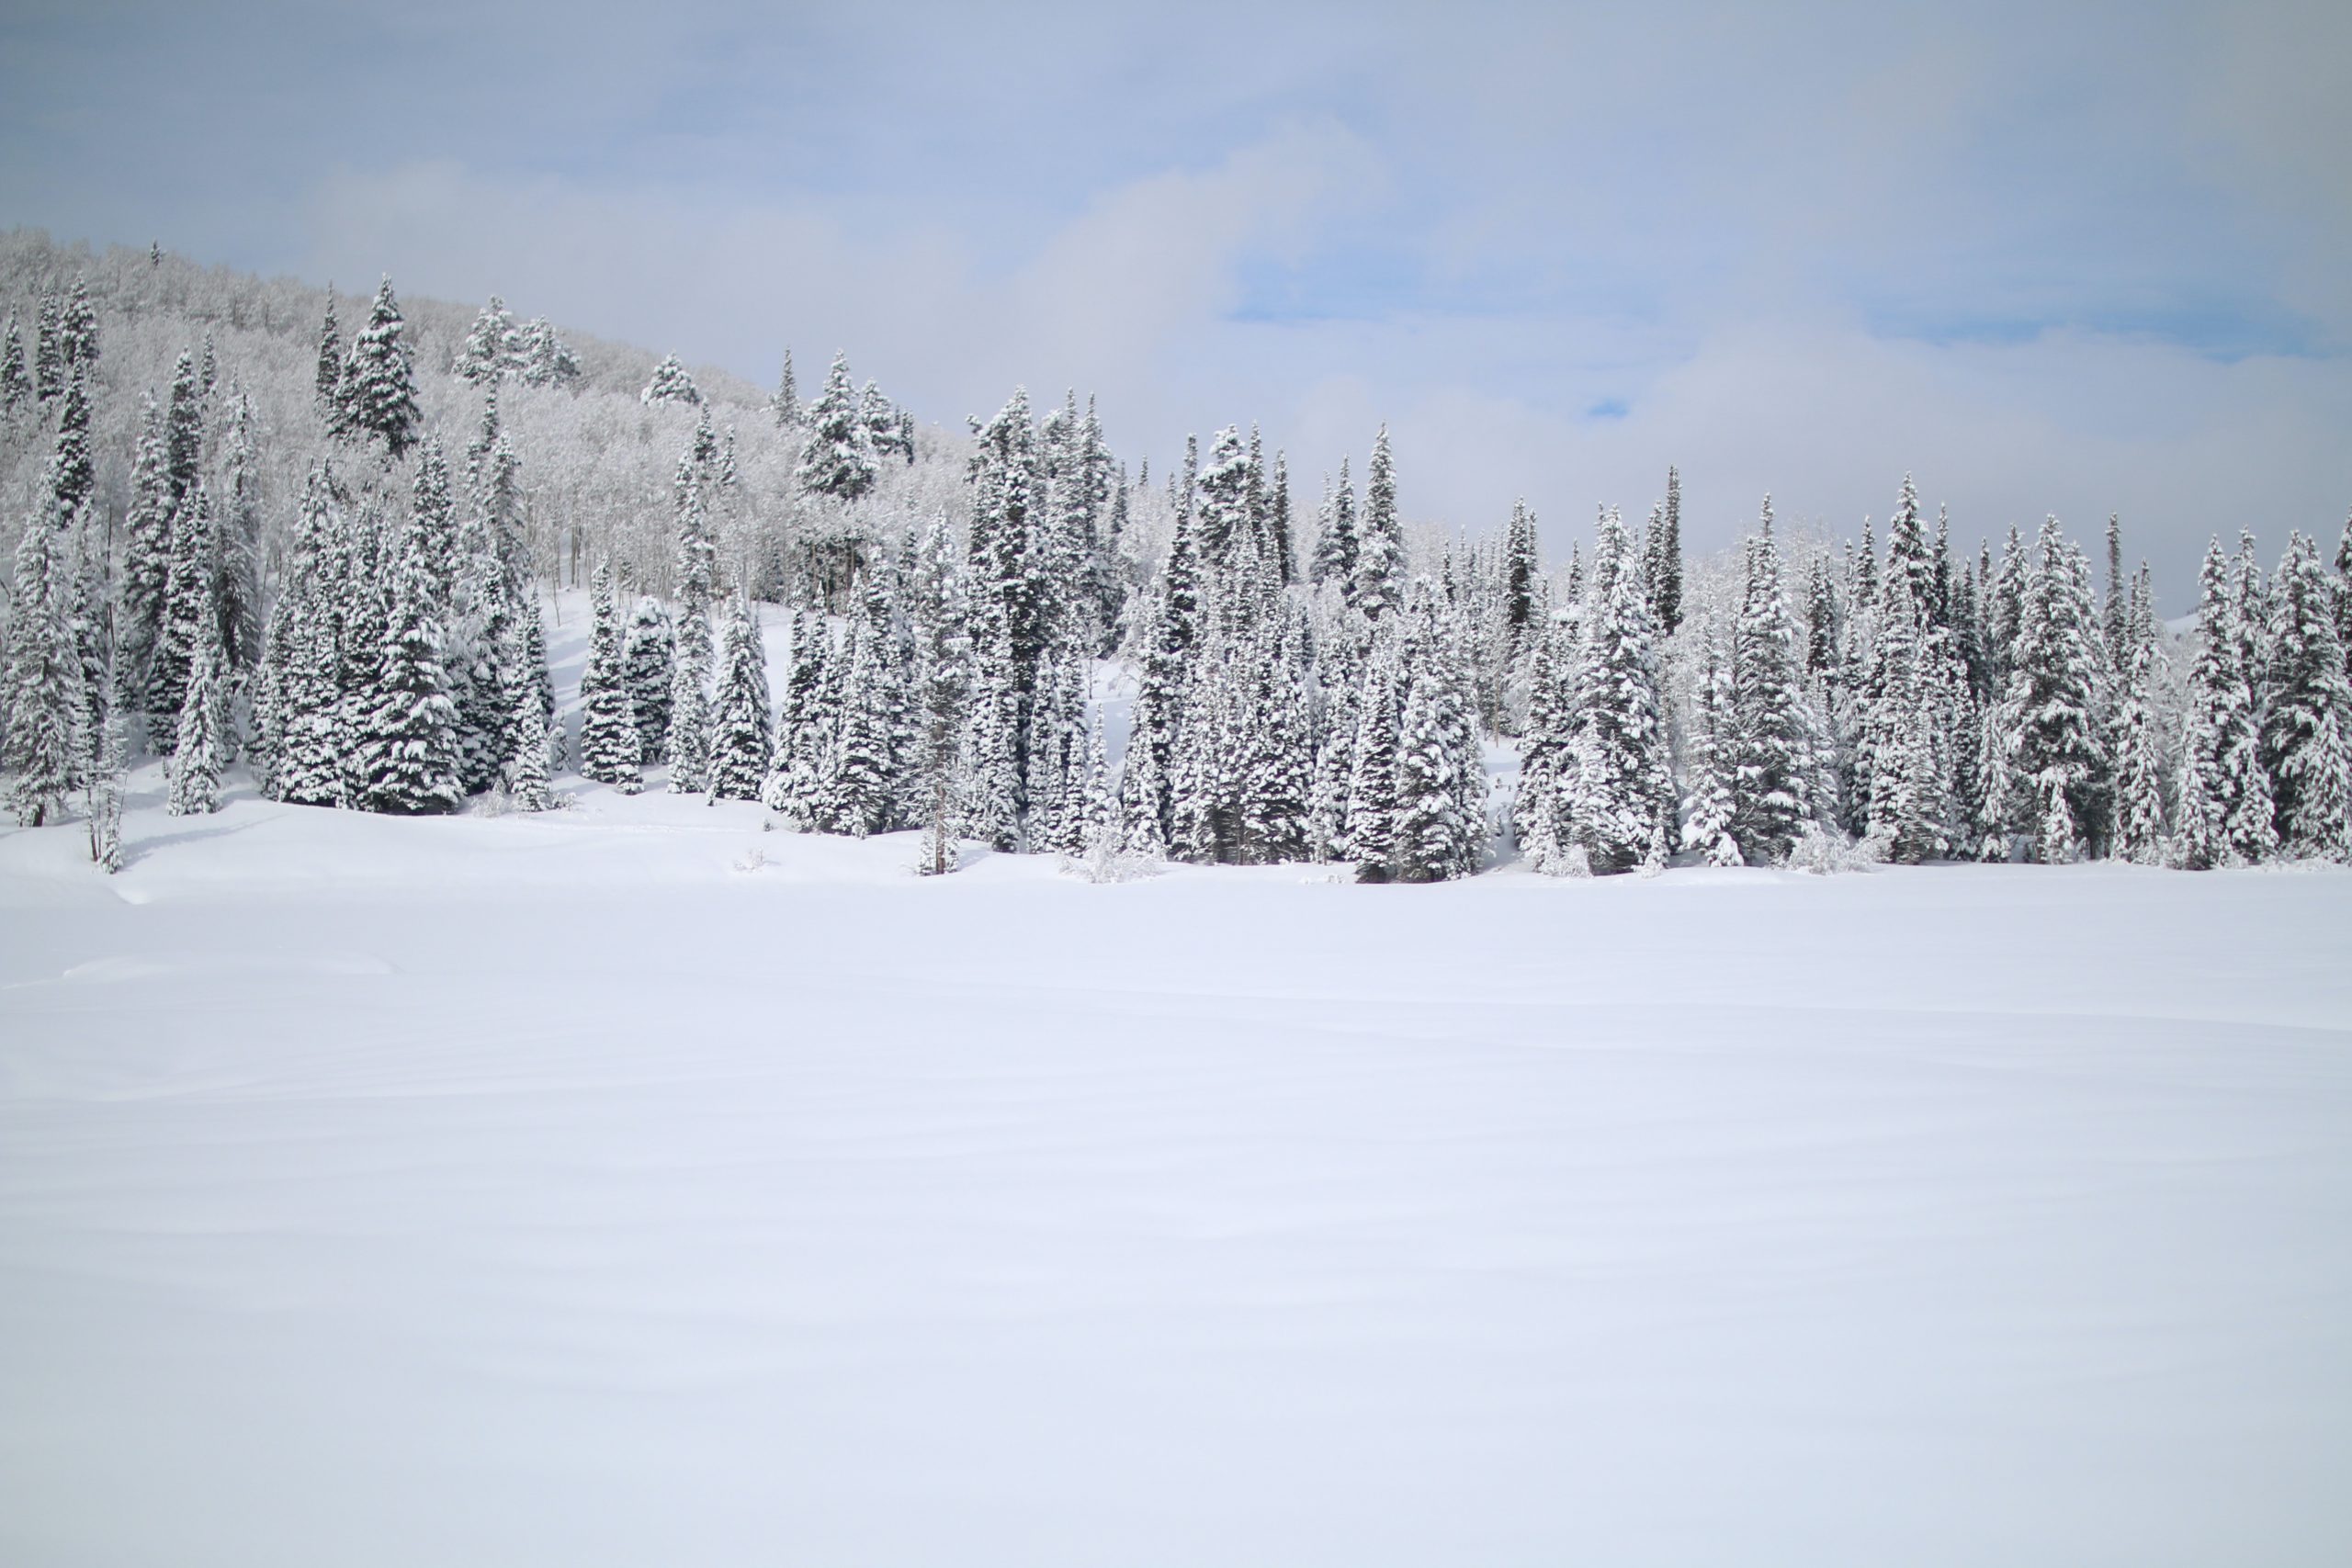 A photograph of a snow-covered field in front of a snow-filled pine forest. The sky is a light blue and is dotted with wisps of white clouds.